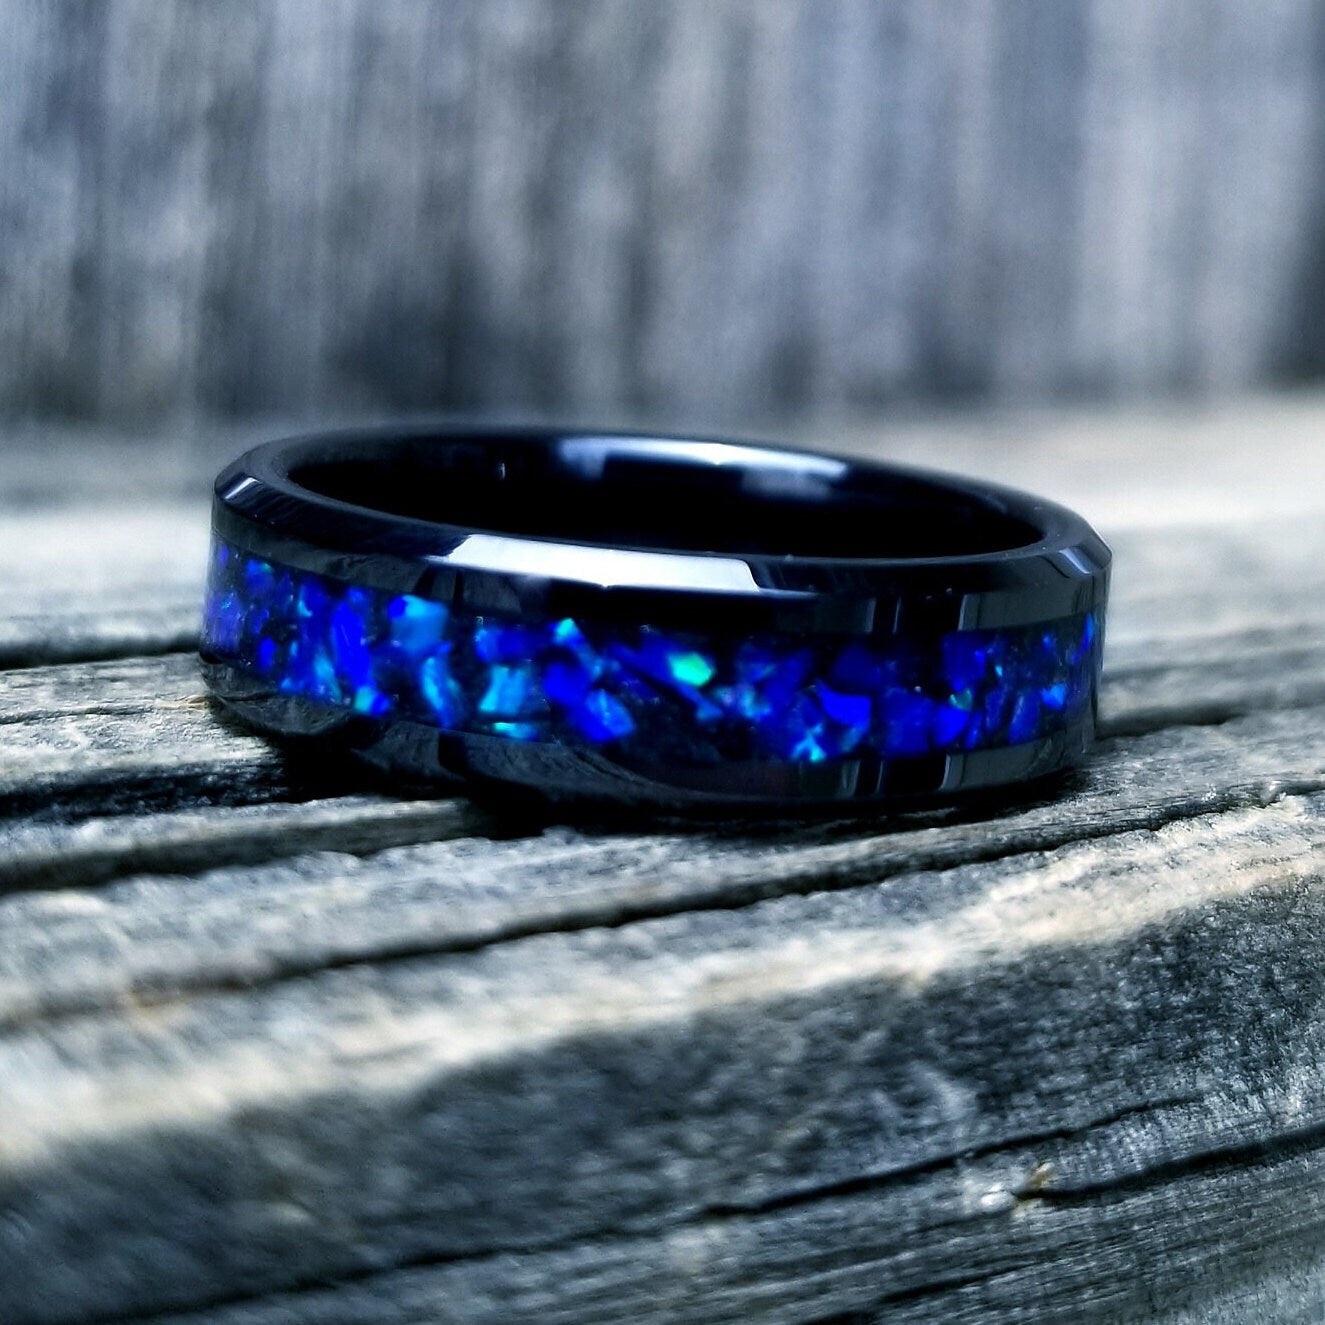 His and Hers Wedding Ring Set. Opal rings. Black Ceramic ring set with violet fire opal and glowstone inlay. 8mm and 6mm rings. Sizes 5-13